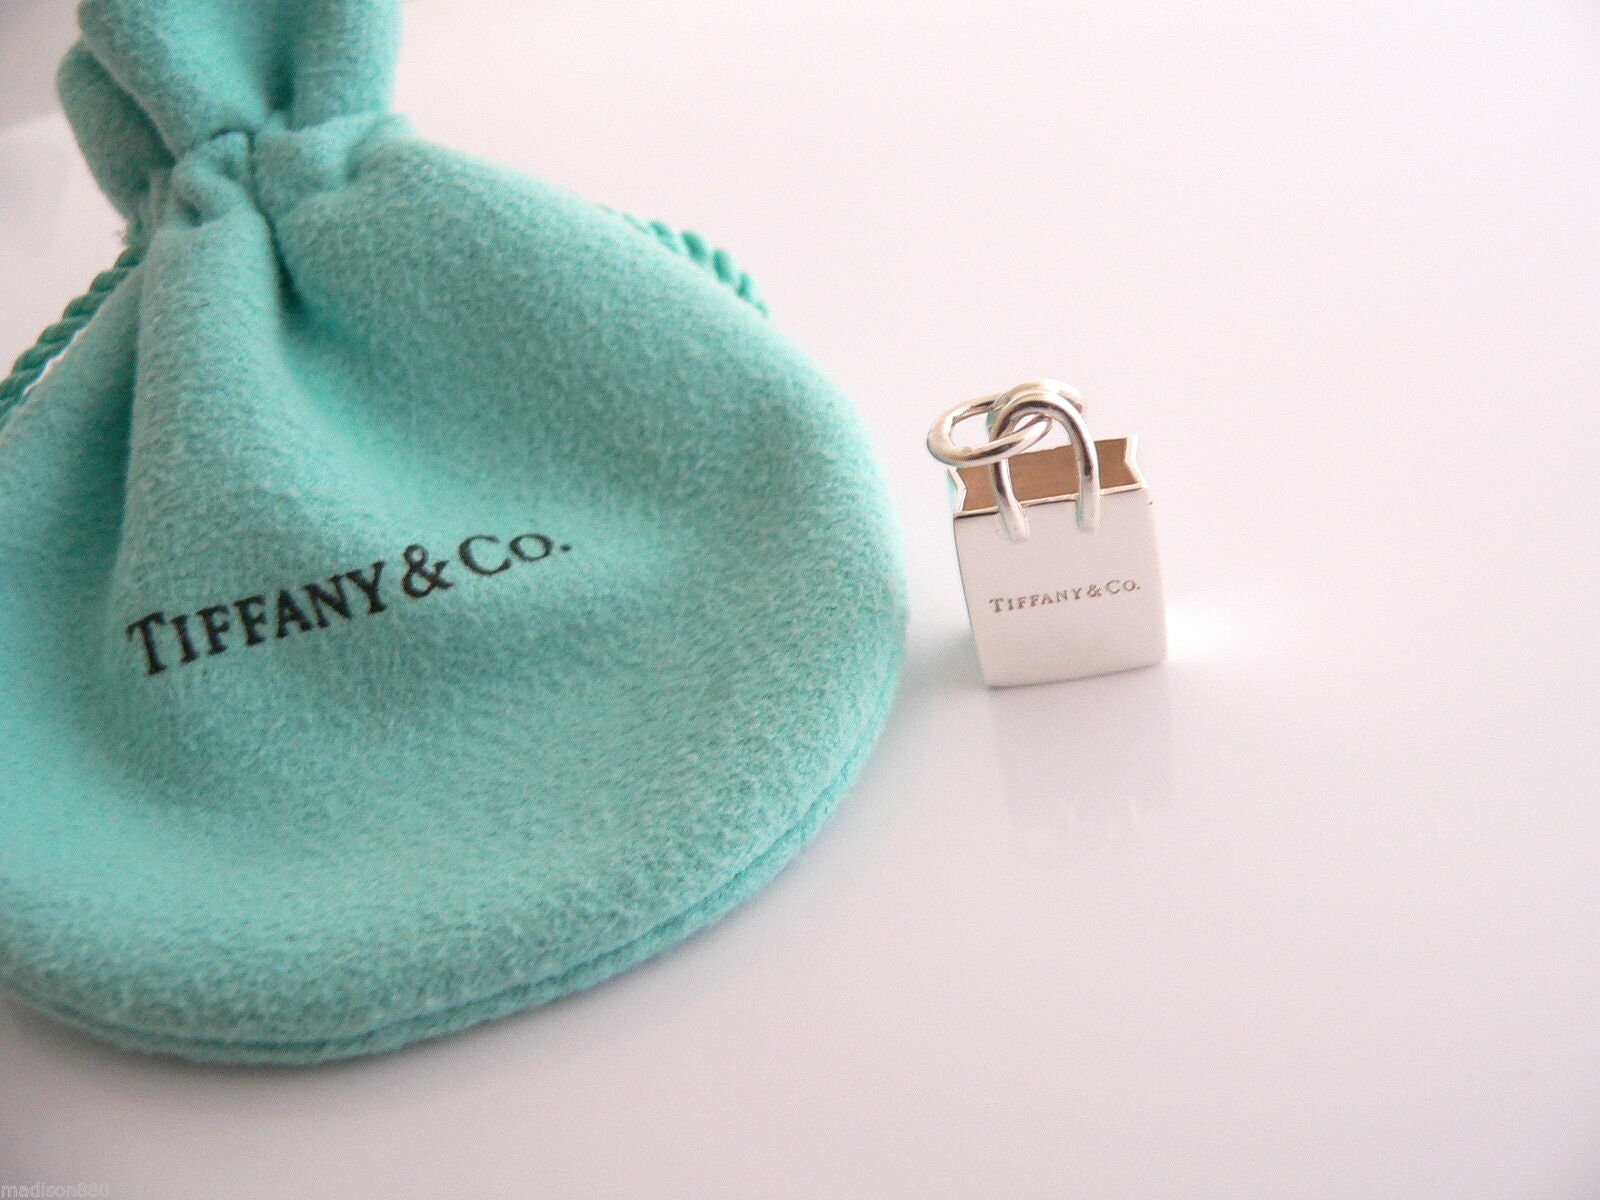 Tiffany & Co.® shopping bag charm in sterling silver with enamel finish.